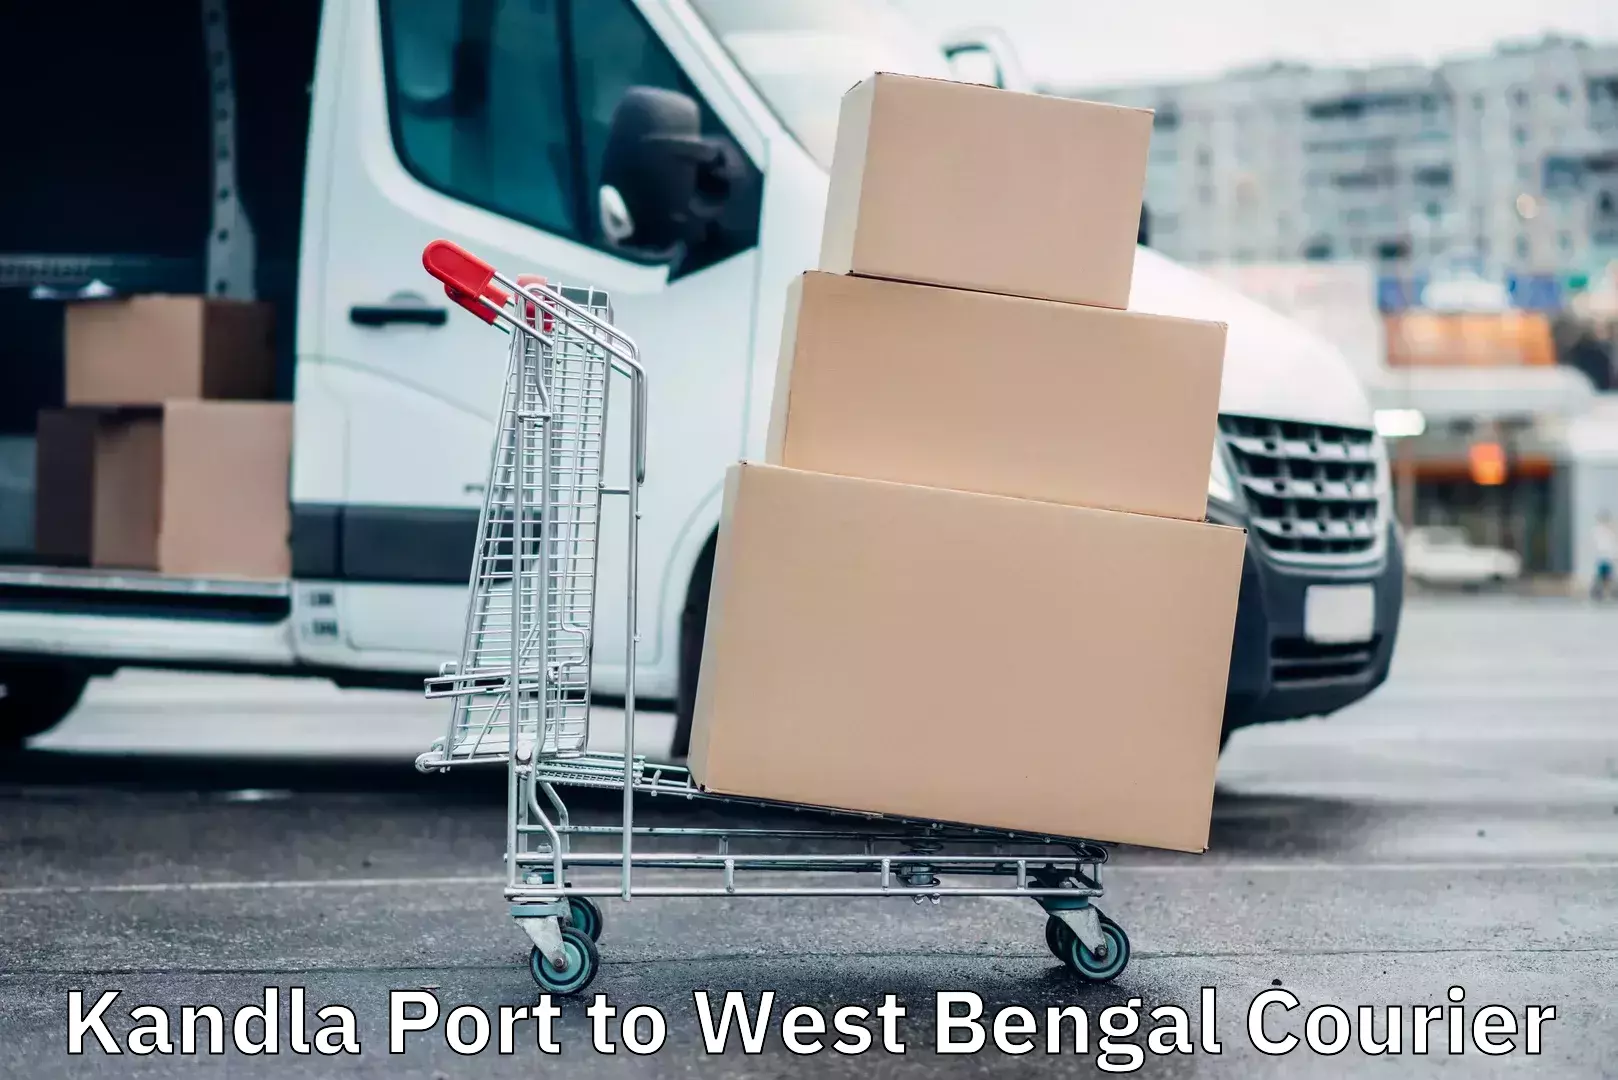 Next day courier in Kandla Port to Bandel